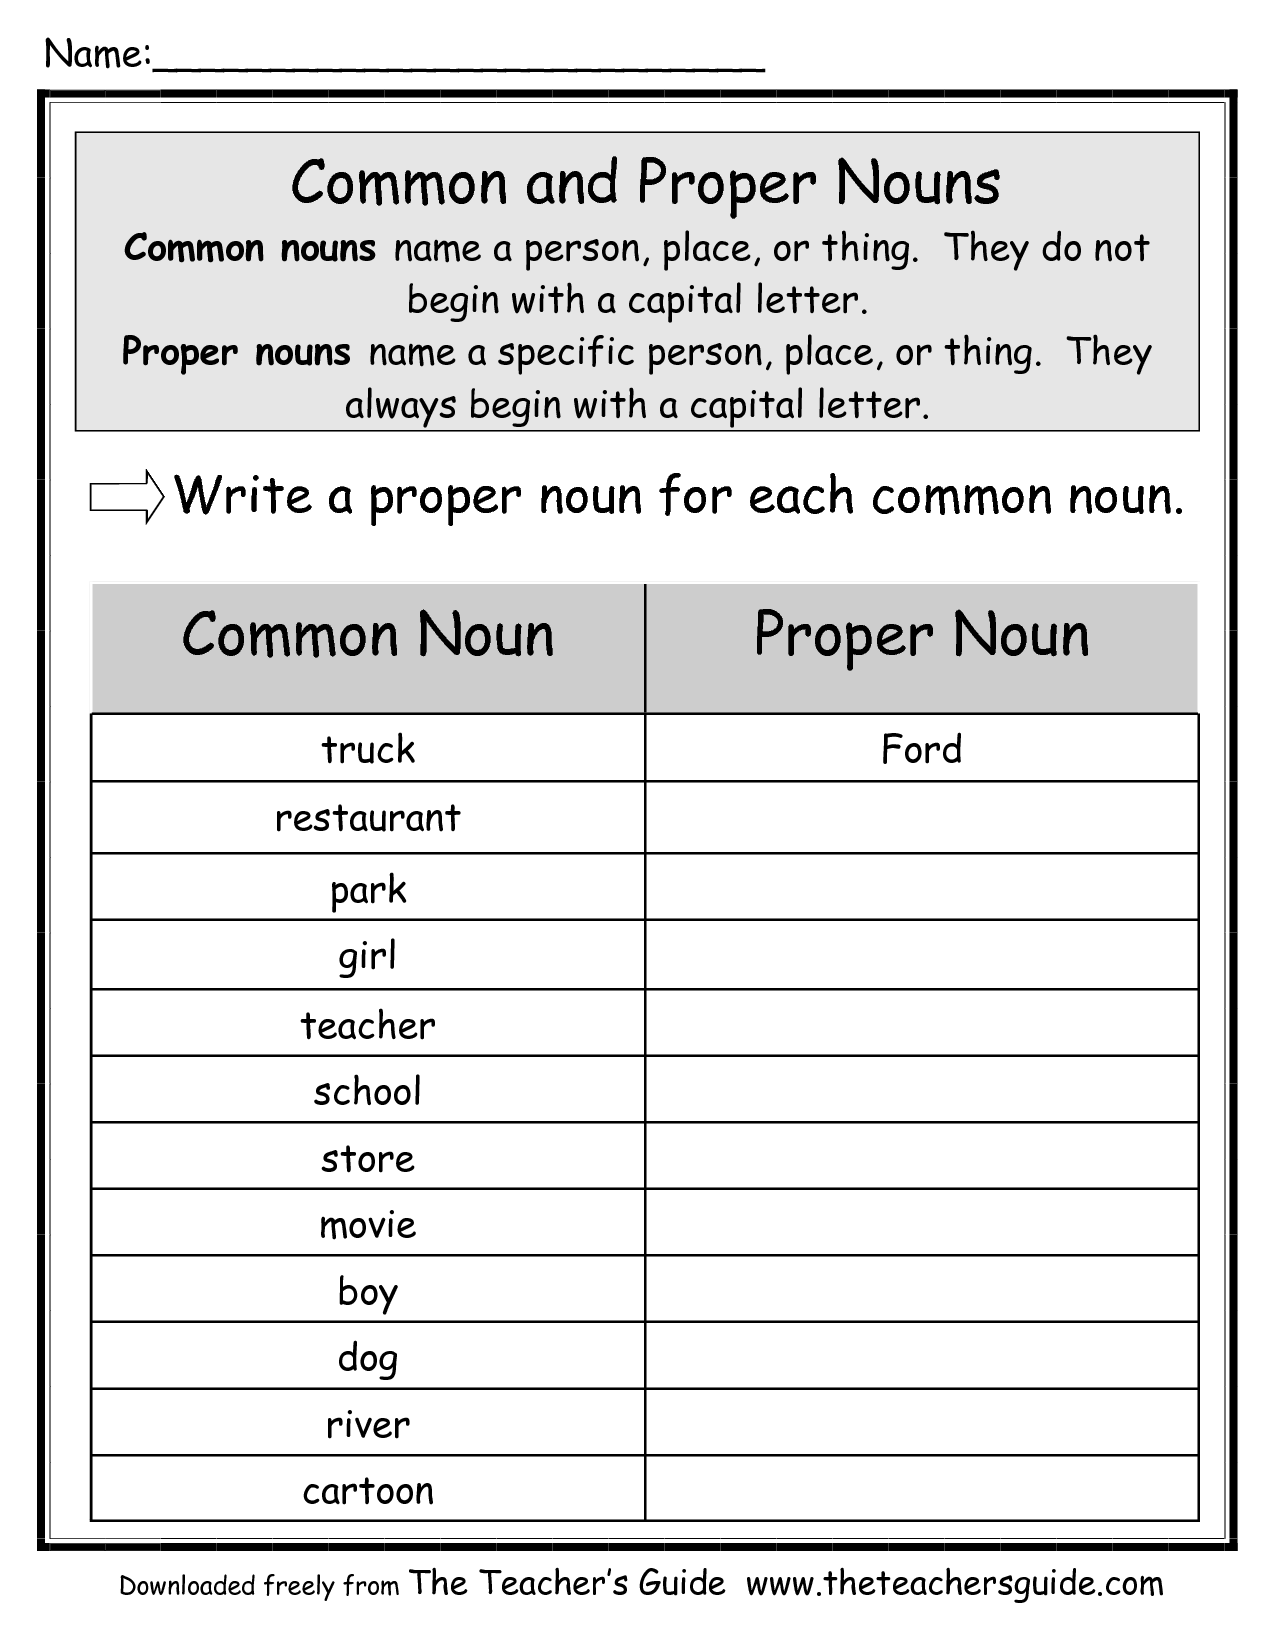 13-common-and-proper-nouns-worksheets-worksheeto